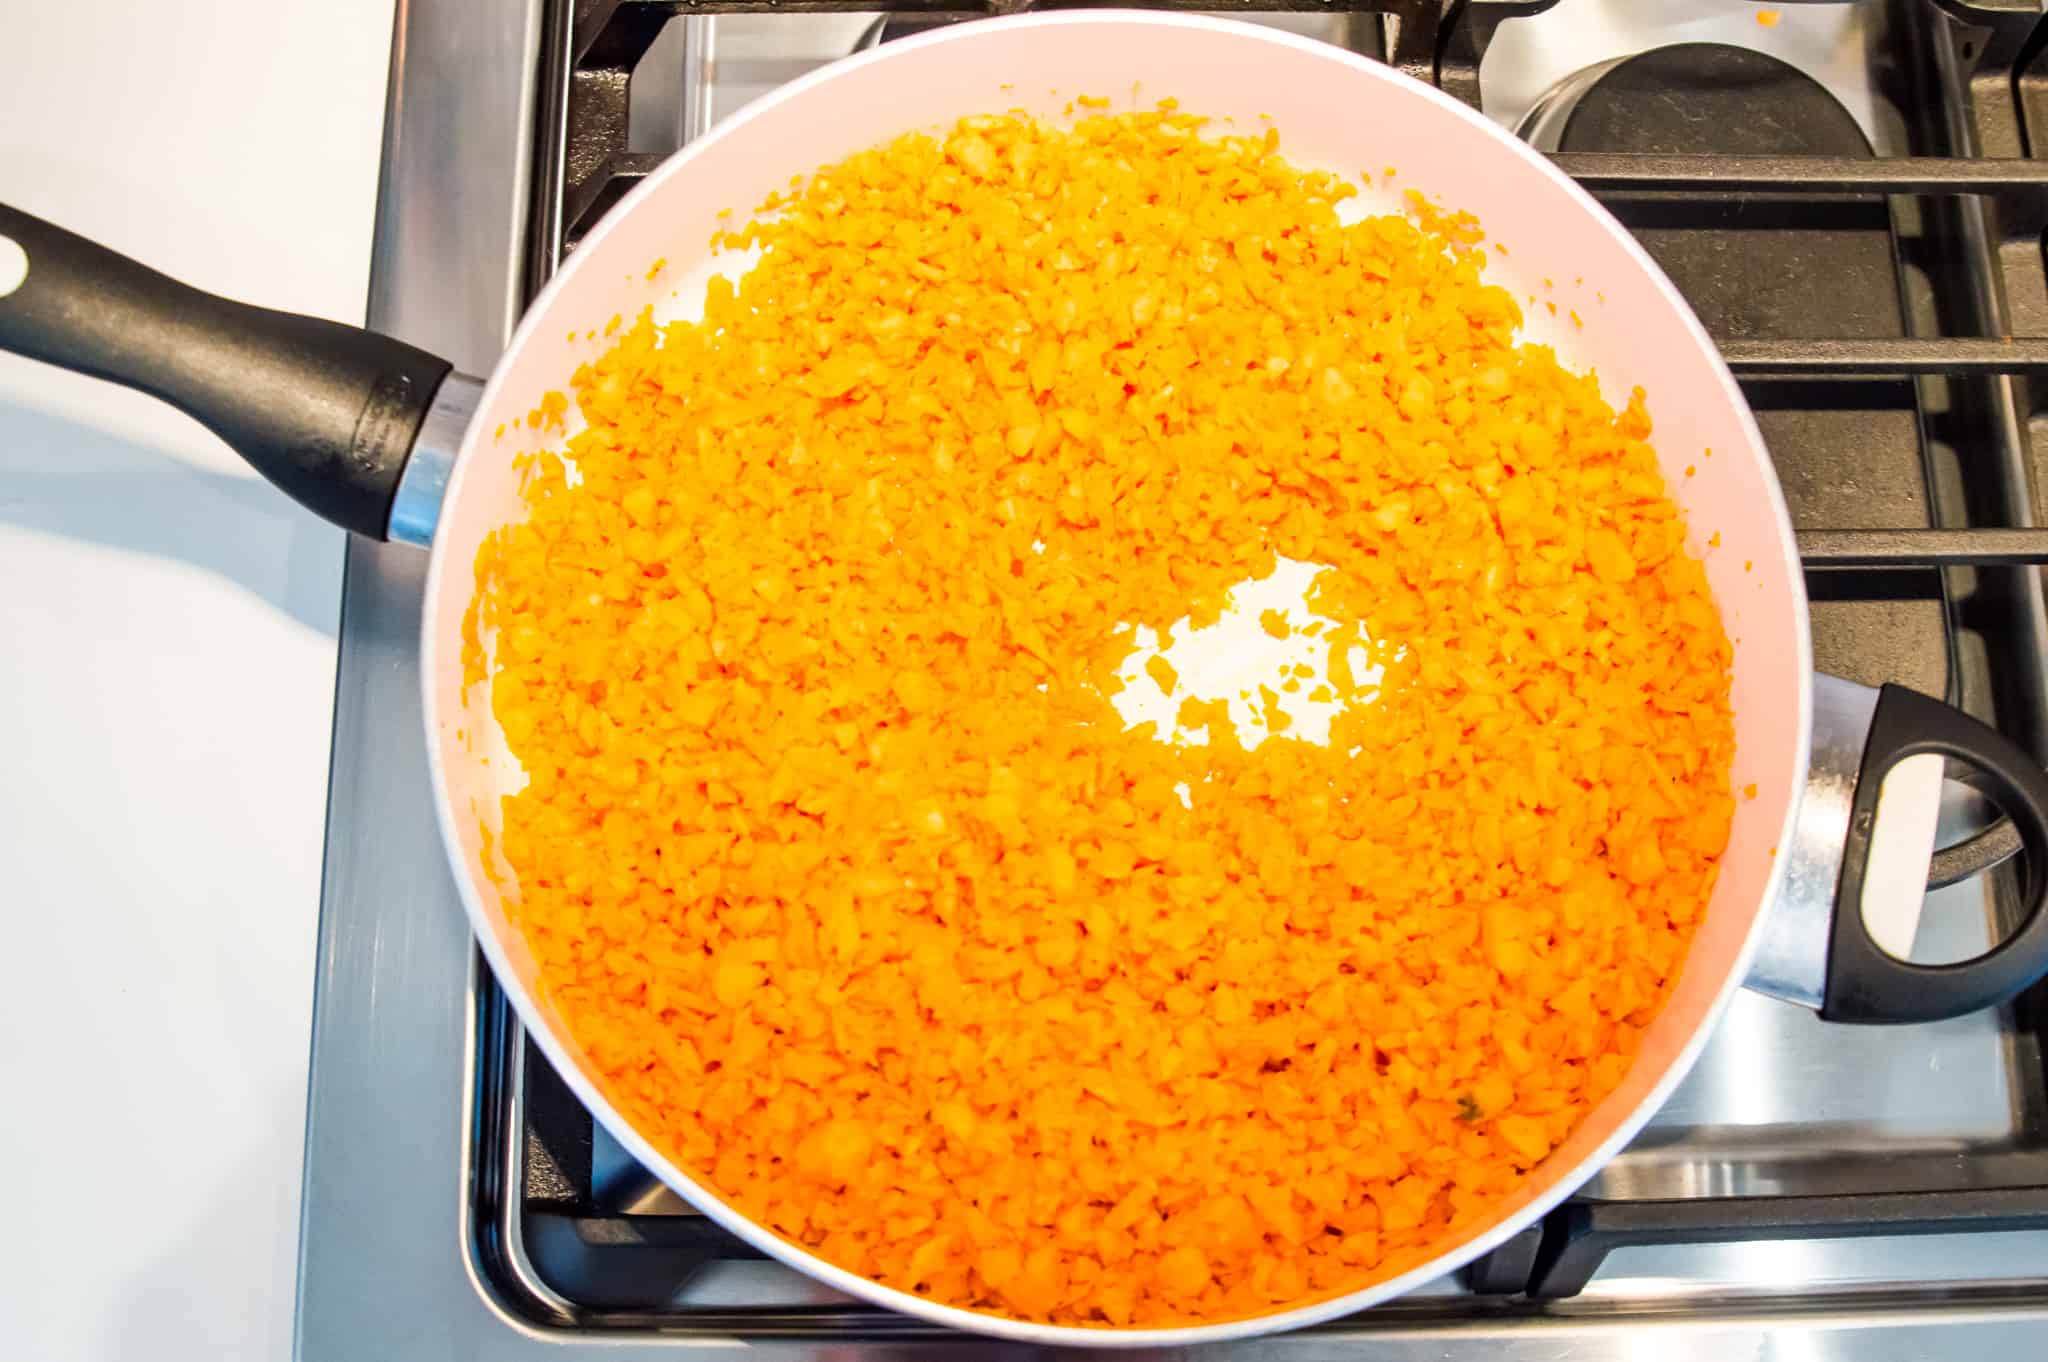 Sweet potato rice being cooked in a large pan on the stovetop.